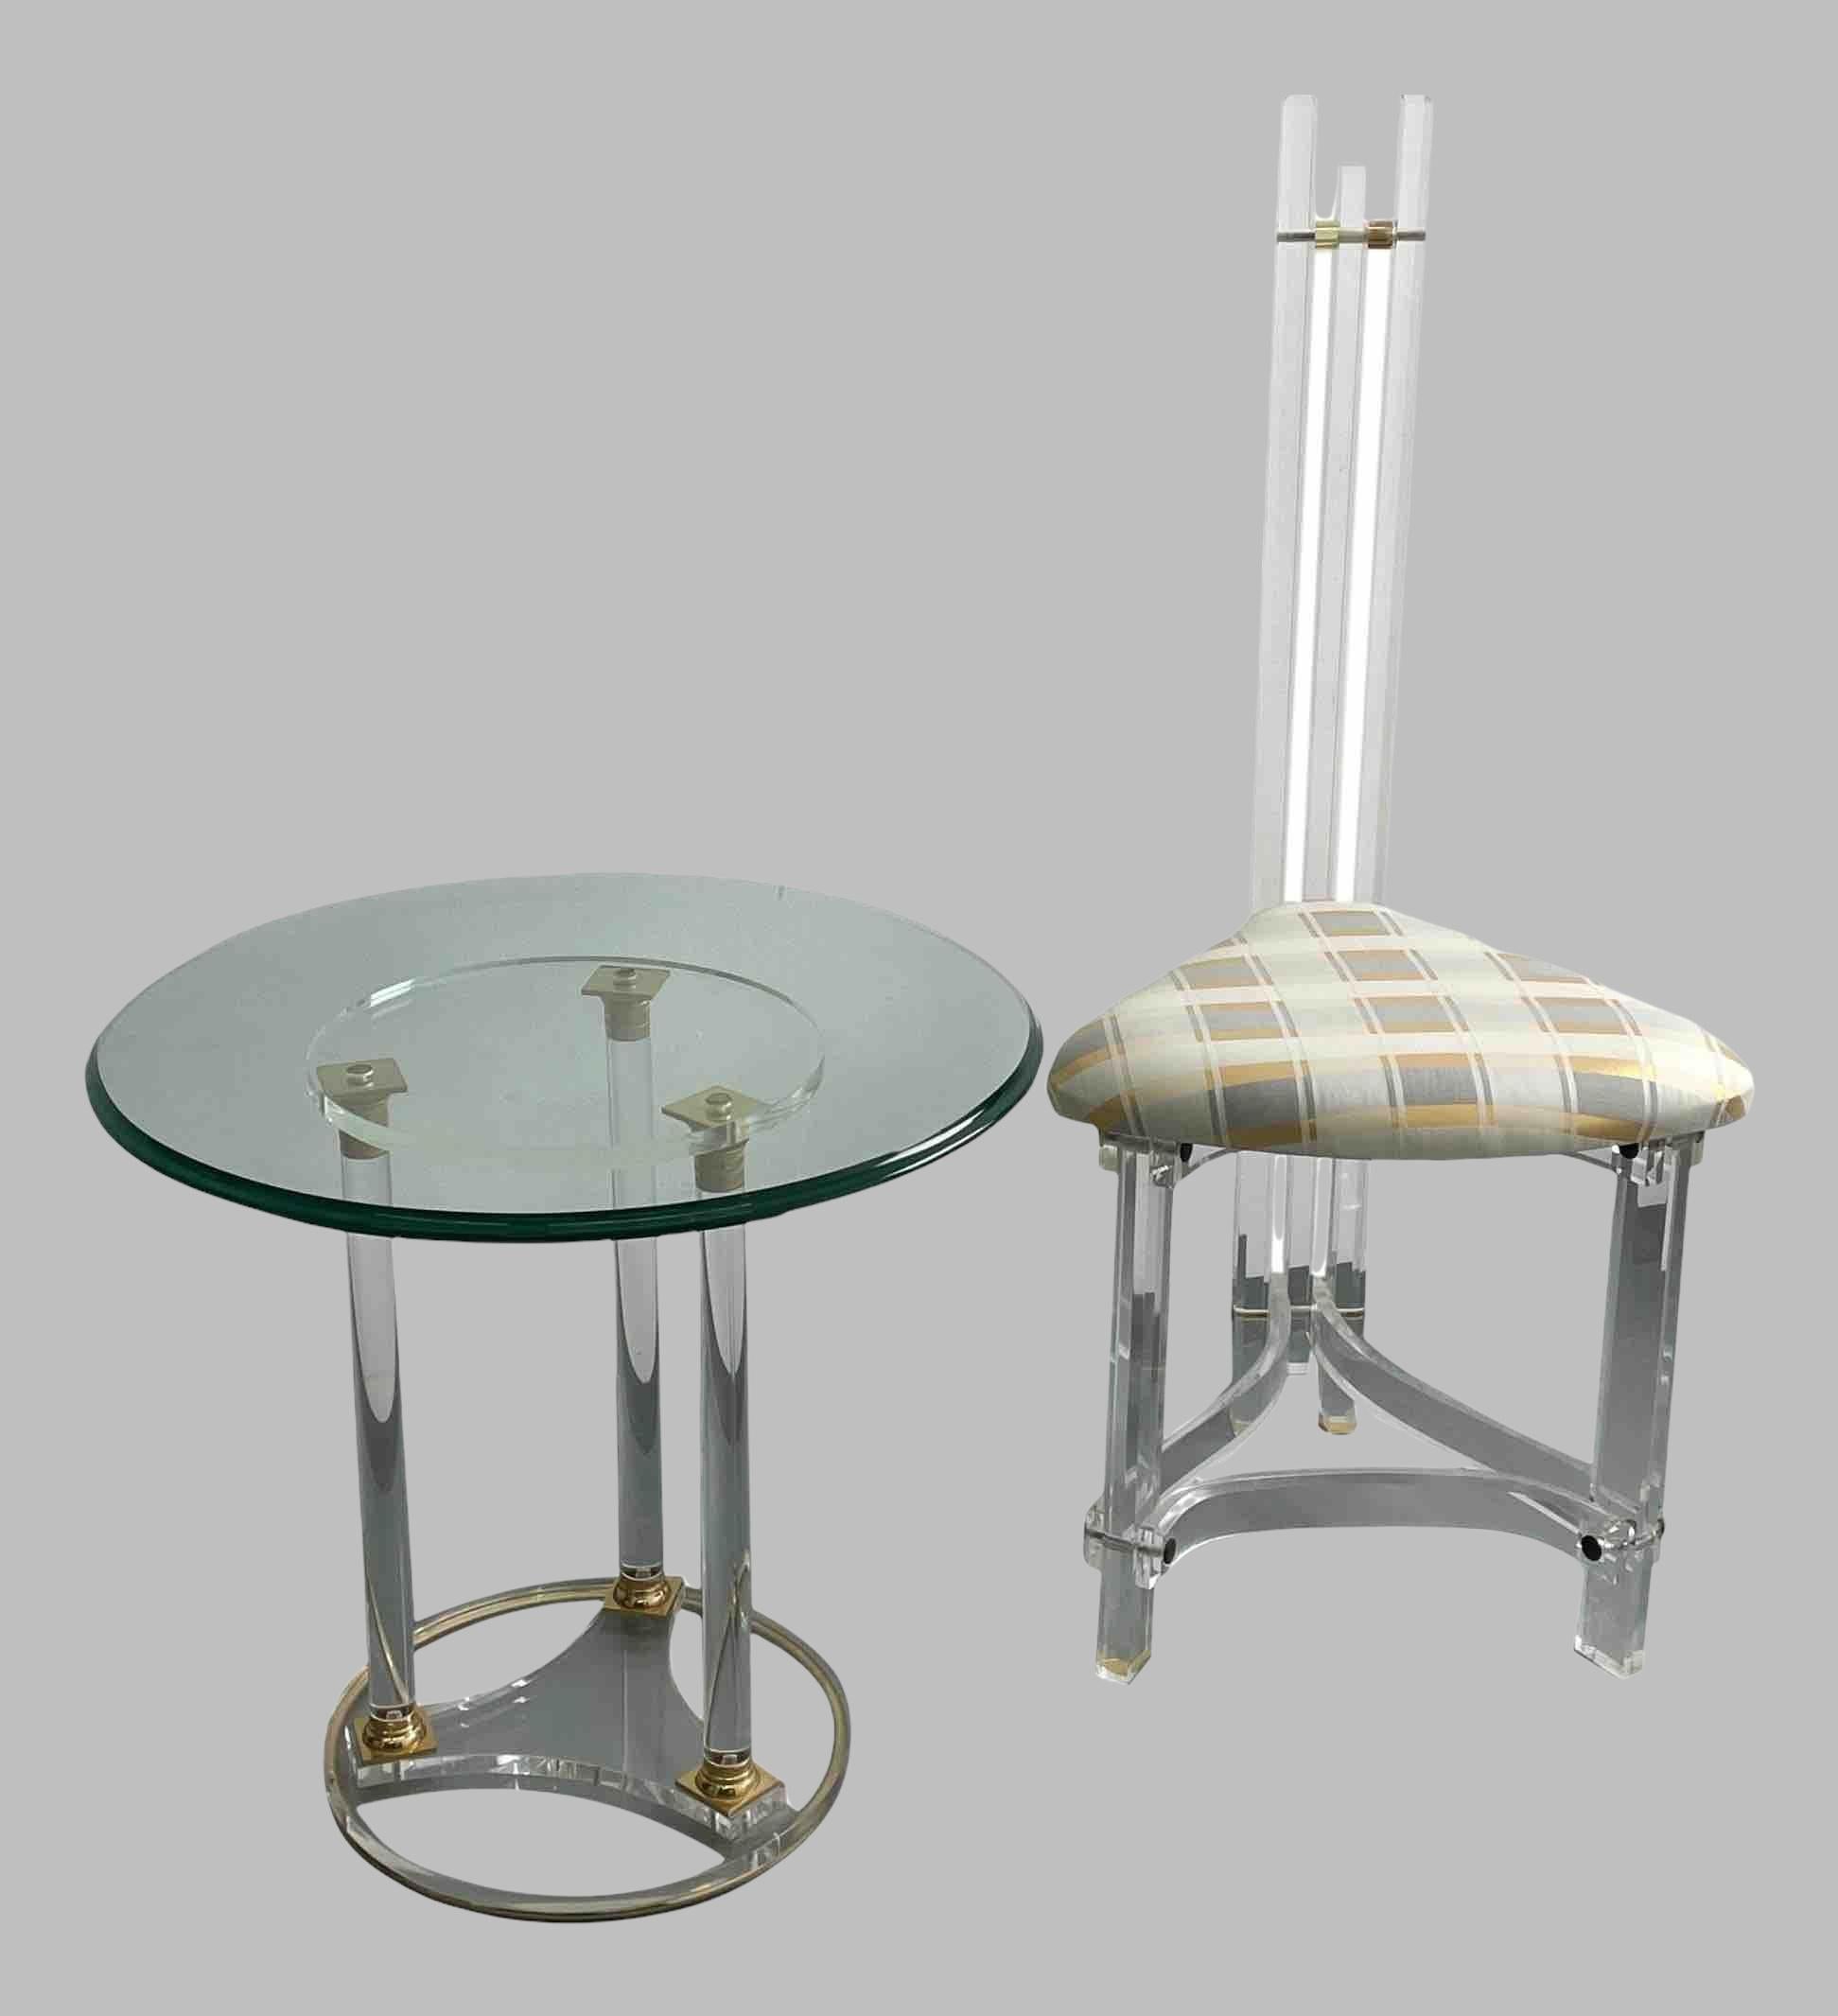 Offered is this beautiful set, a small side table with glass top and the matching chair. Made in Germany, circa 1980s. Glass tabletop in excellent condition. This set was found at an estate sale in Nuremberg, Germany. For years it stood in the entry